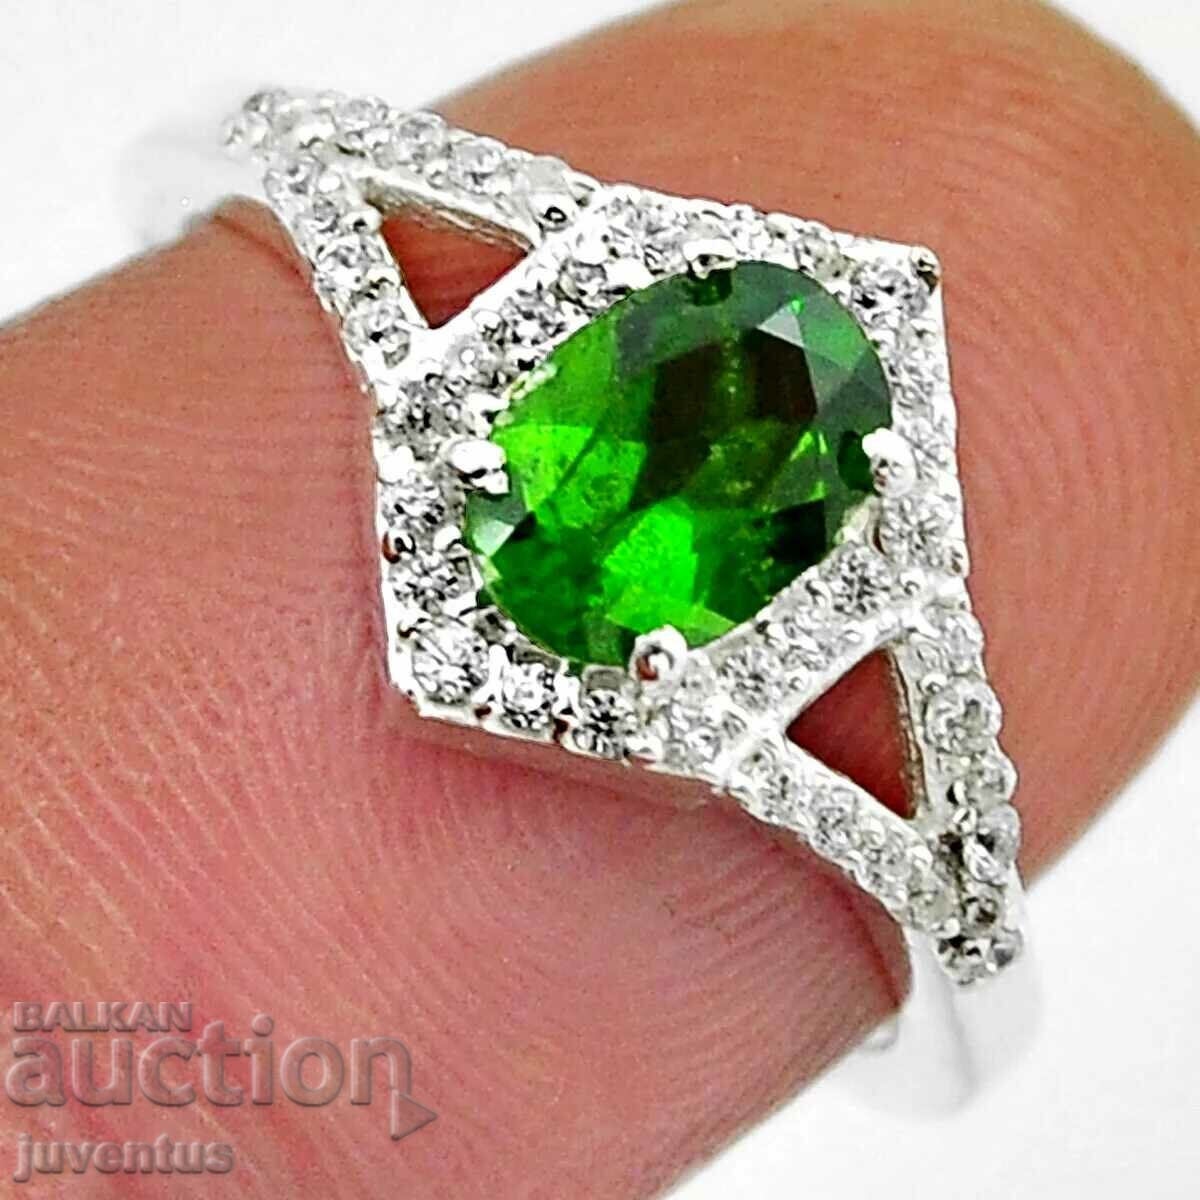 SILVER RING WITH CHROME DIOPSIDE (RUSSIA)